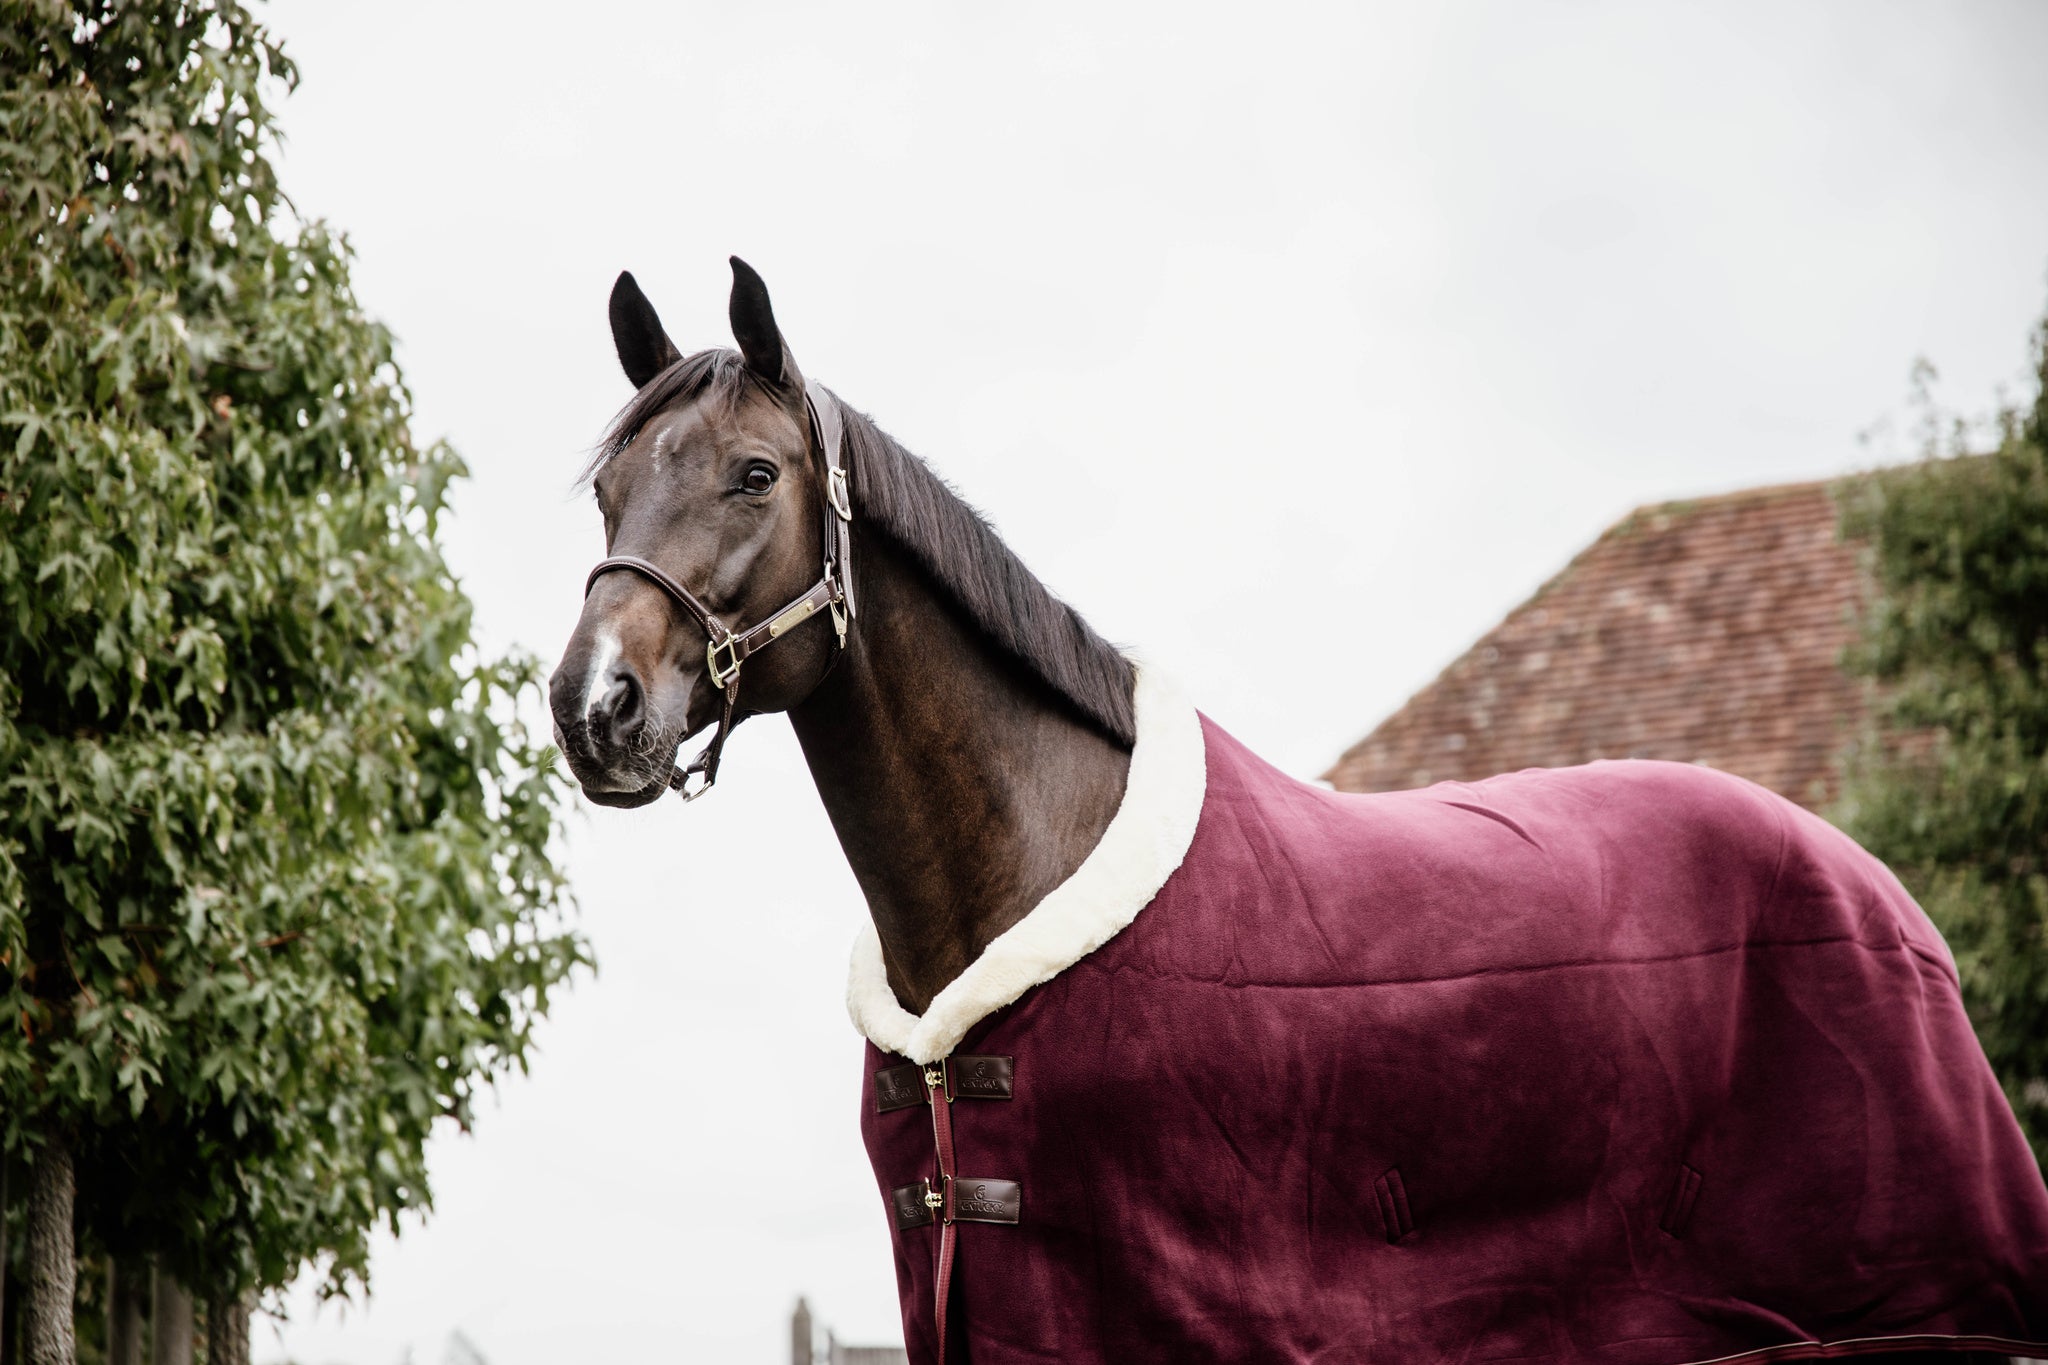 Kentucky Fleece Show Rug Heavy – Bordeaux  The Heavyweight Fleece Show Rug in Bordeaux is NEW for 2020. With all the same characteristics of the original Heavyweight Fleece Show Rug, the Bordeaux will be sort after this year. With the look and hand feel of the authentic wool rug, without all the inconveniences that a wool rug can have.